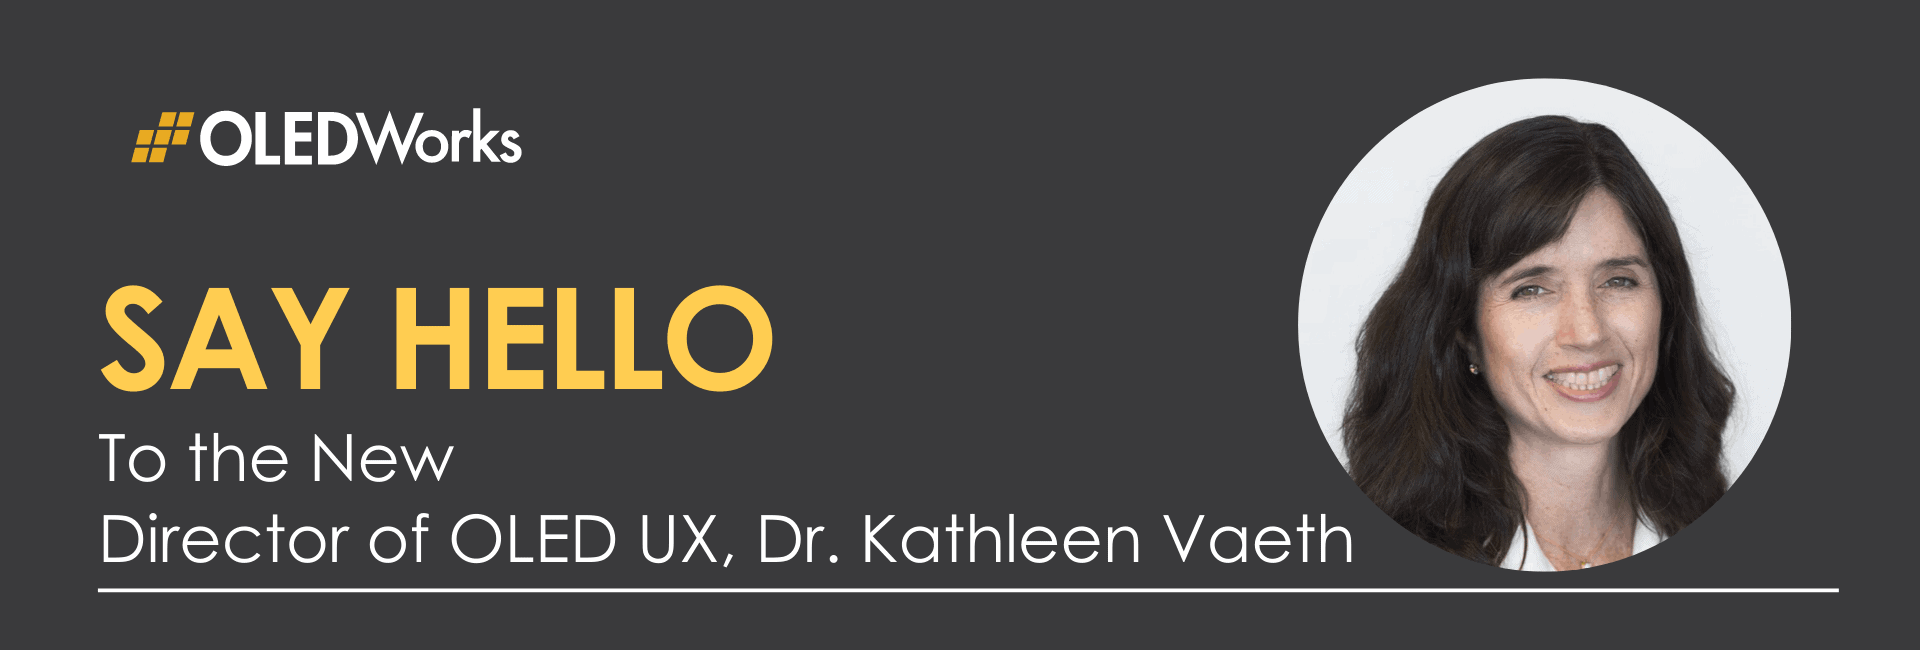 Say Hello to the New Director of OLED User Experience (UX): Dr. Kathleen Vaeth